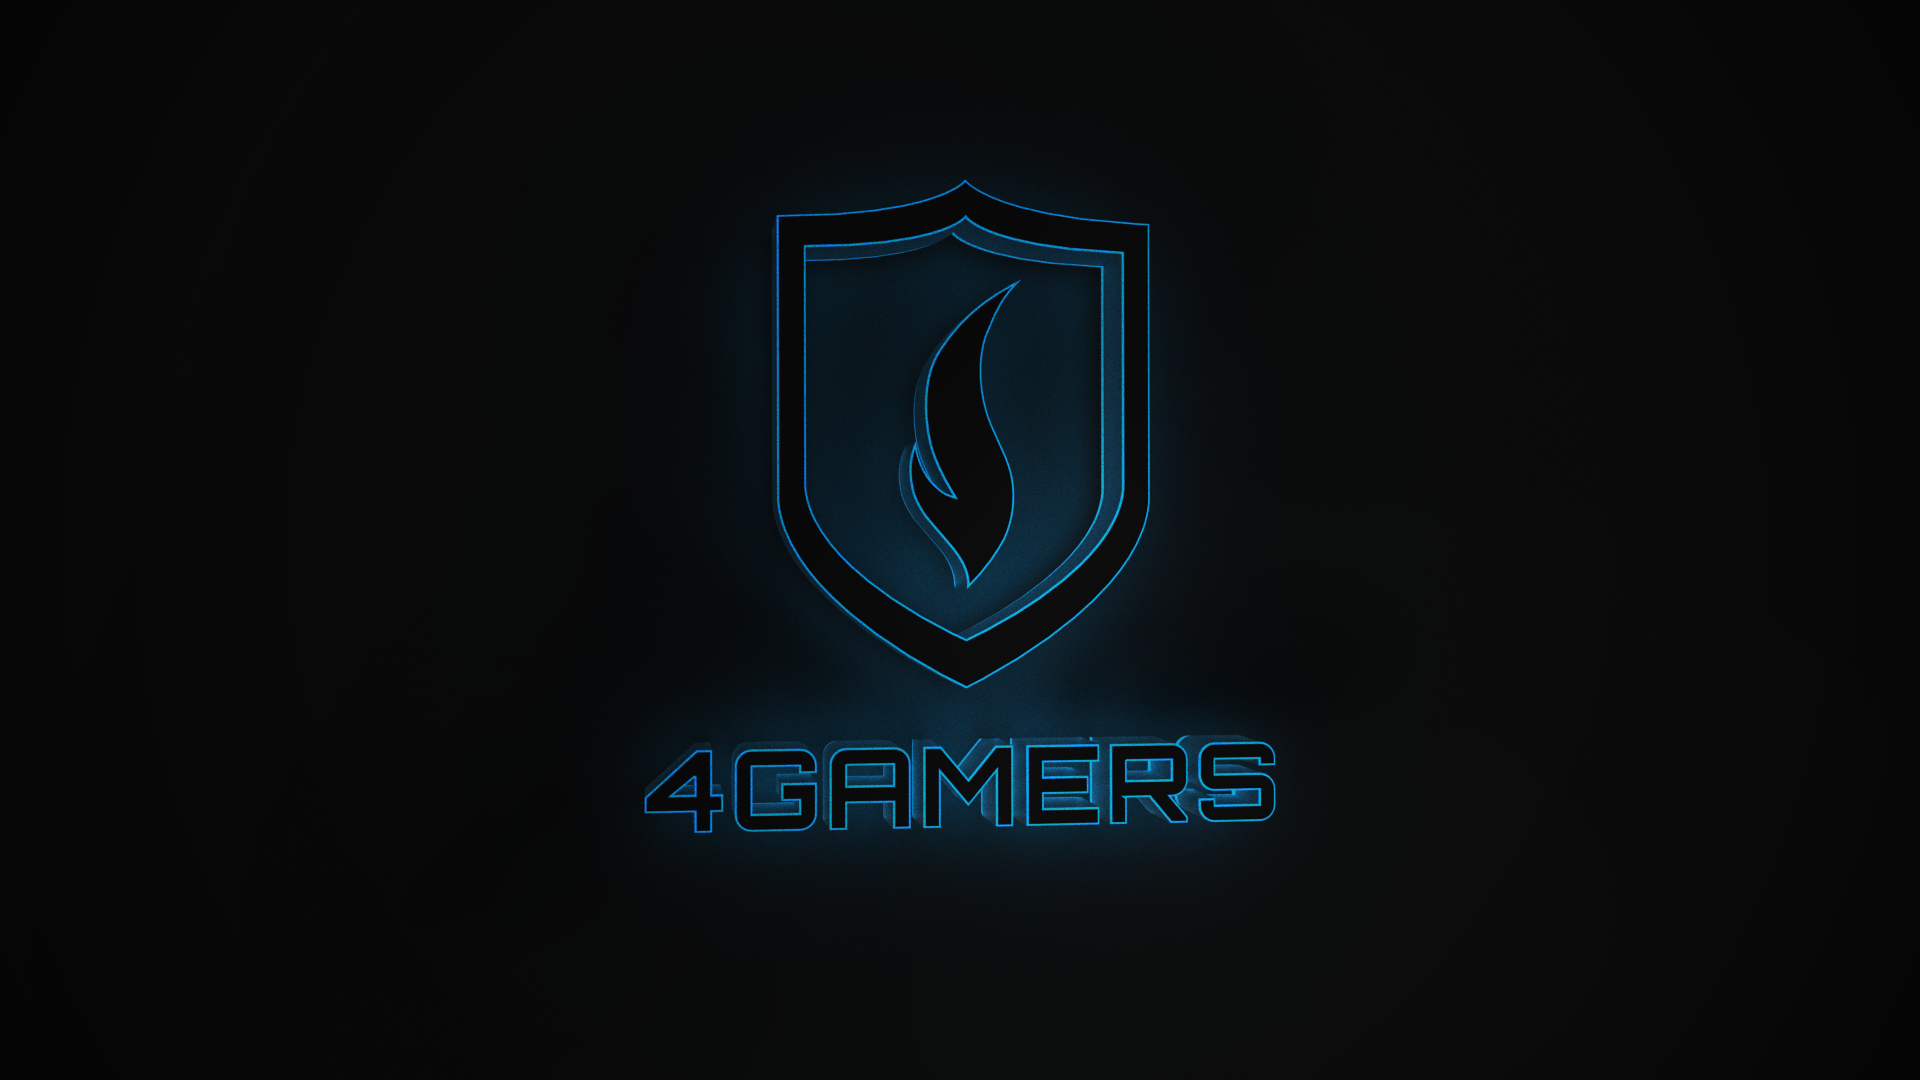 General 1920x1080 4Gamers logo simple background PC gaming black background